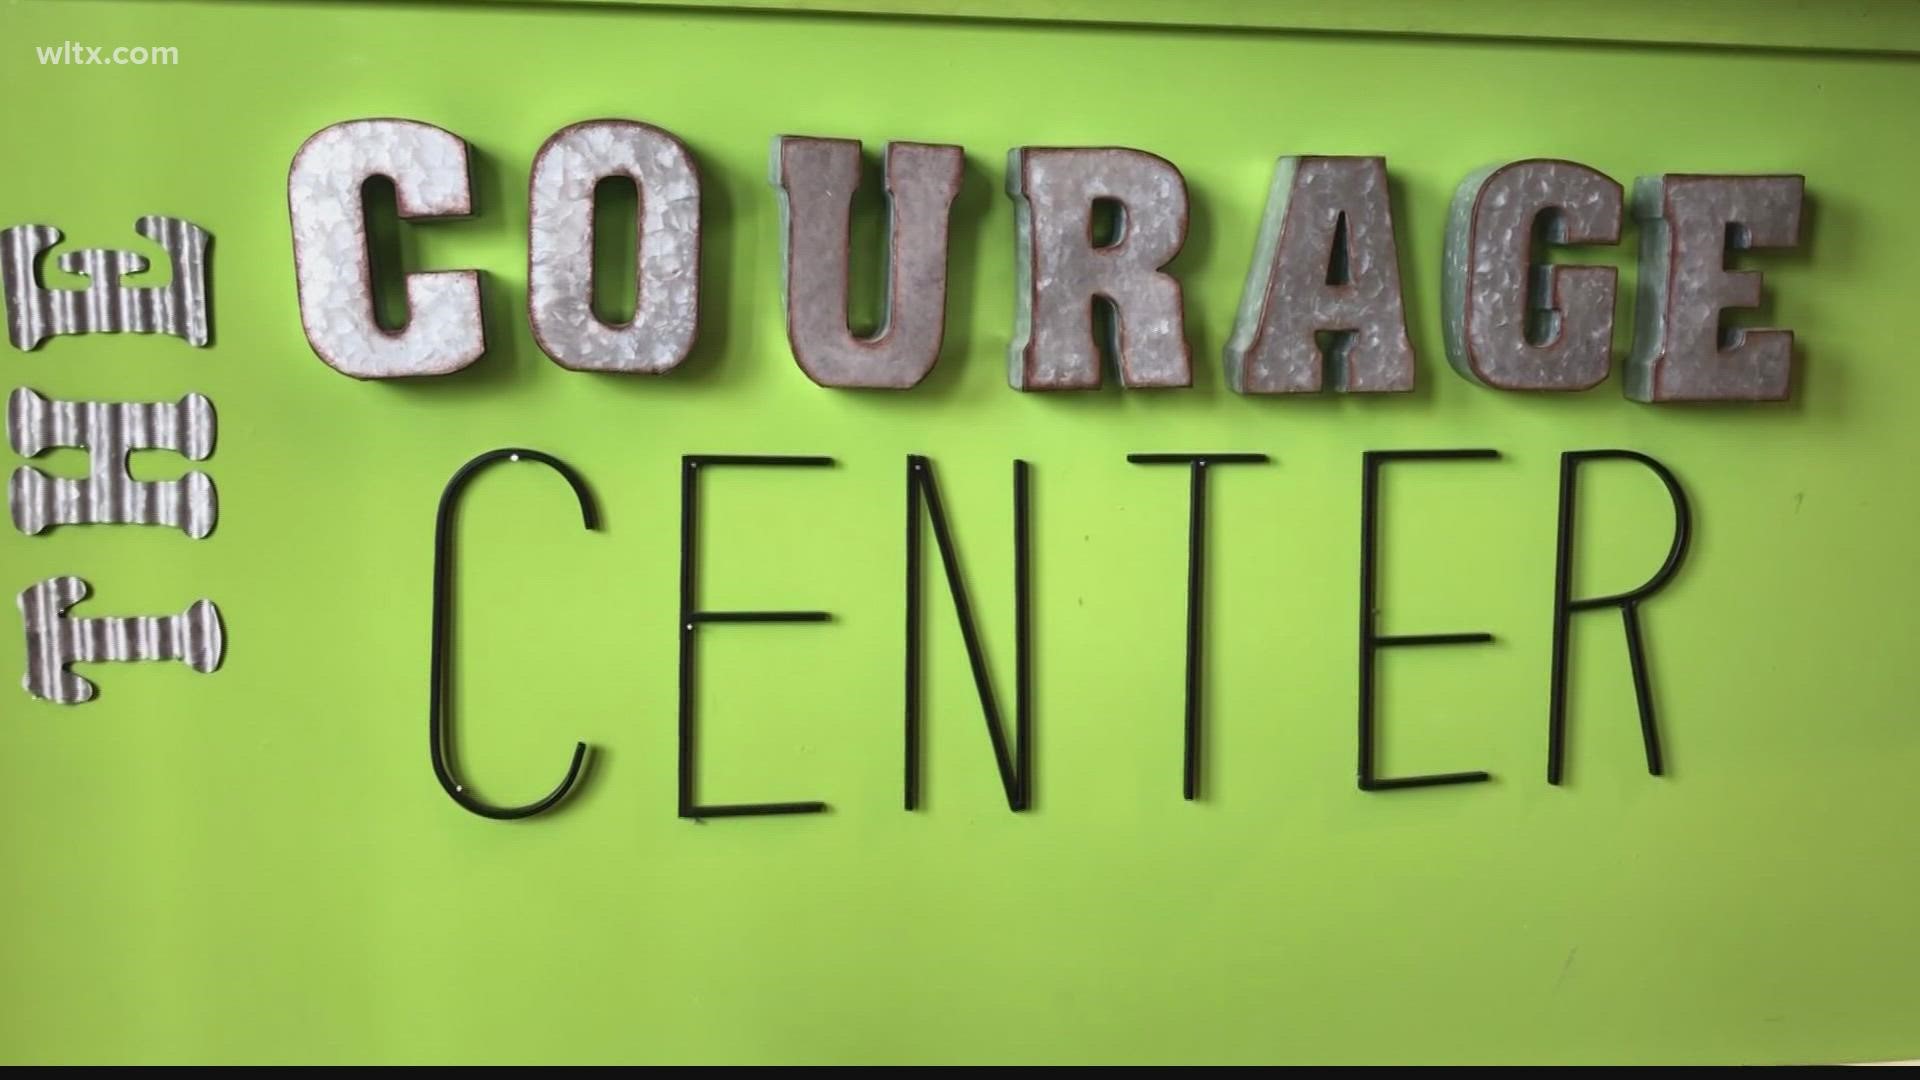 The Courage Center helps teens and young adults on their recovery journey.